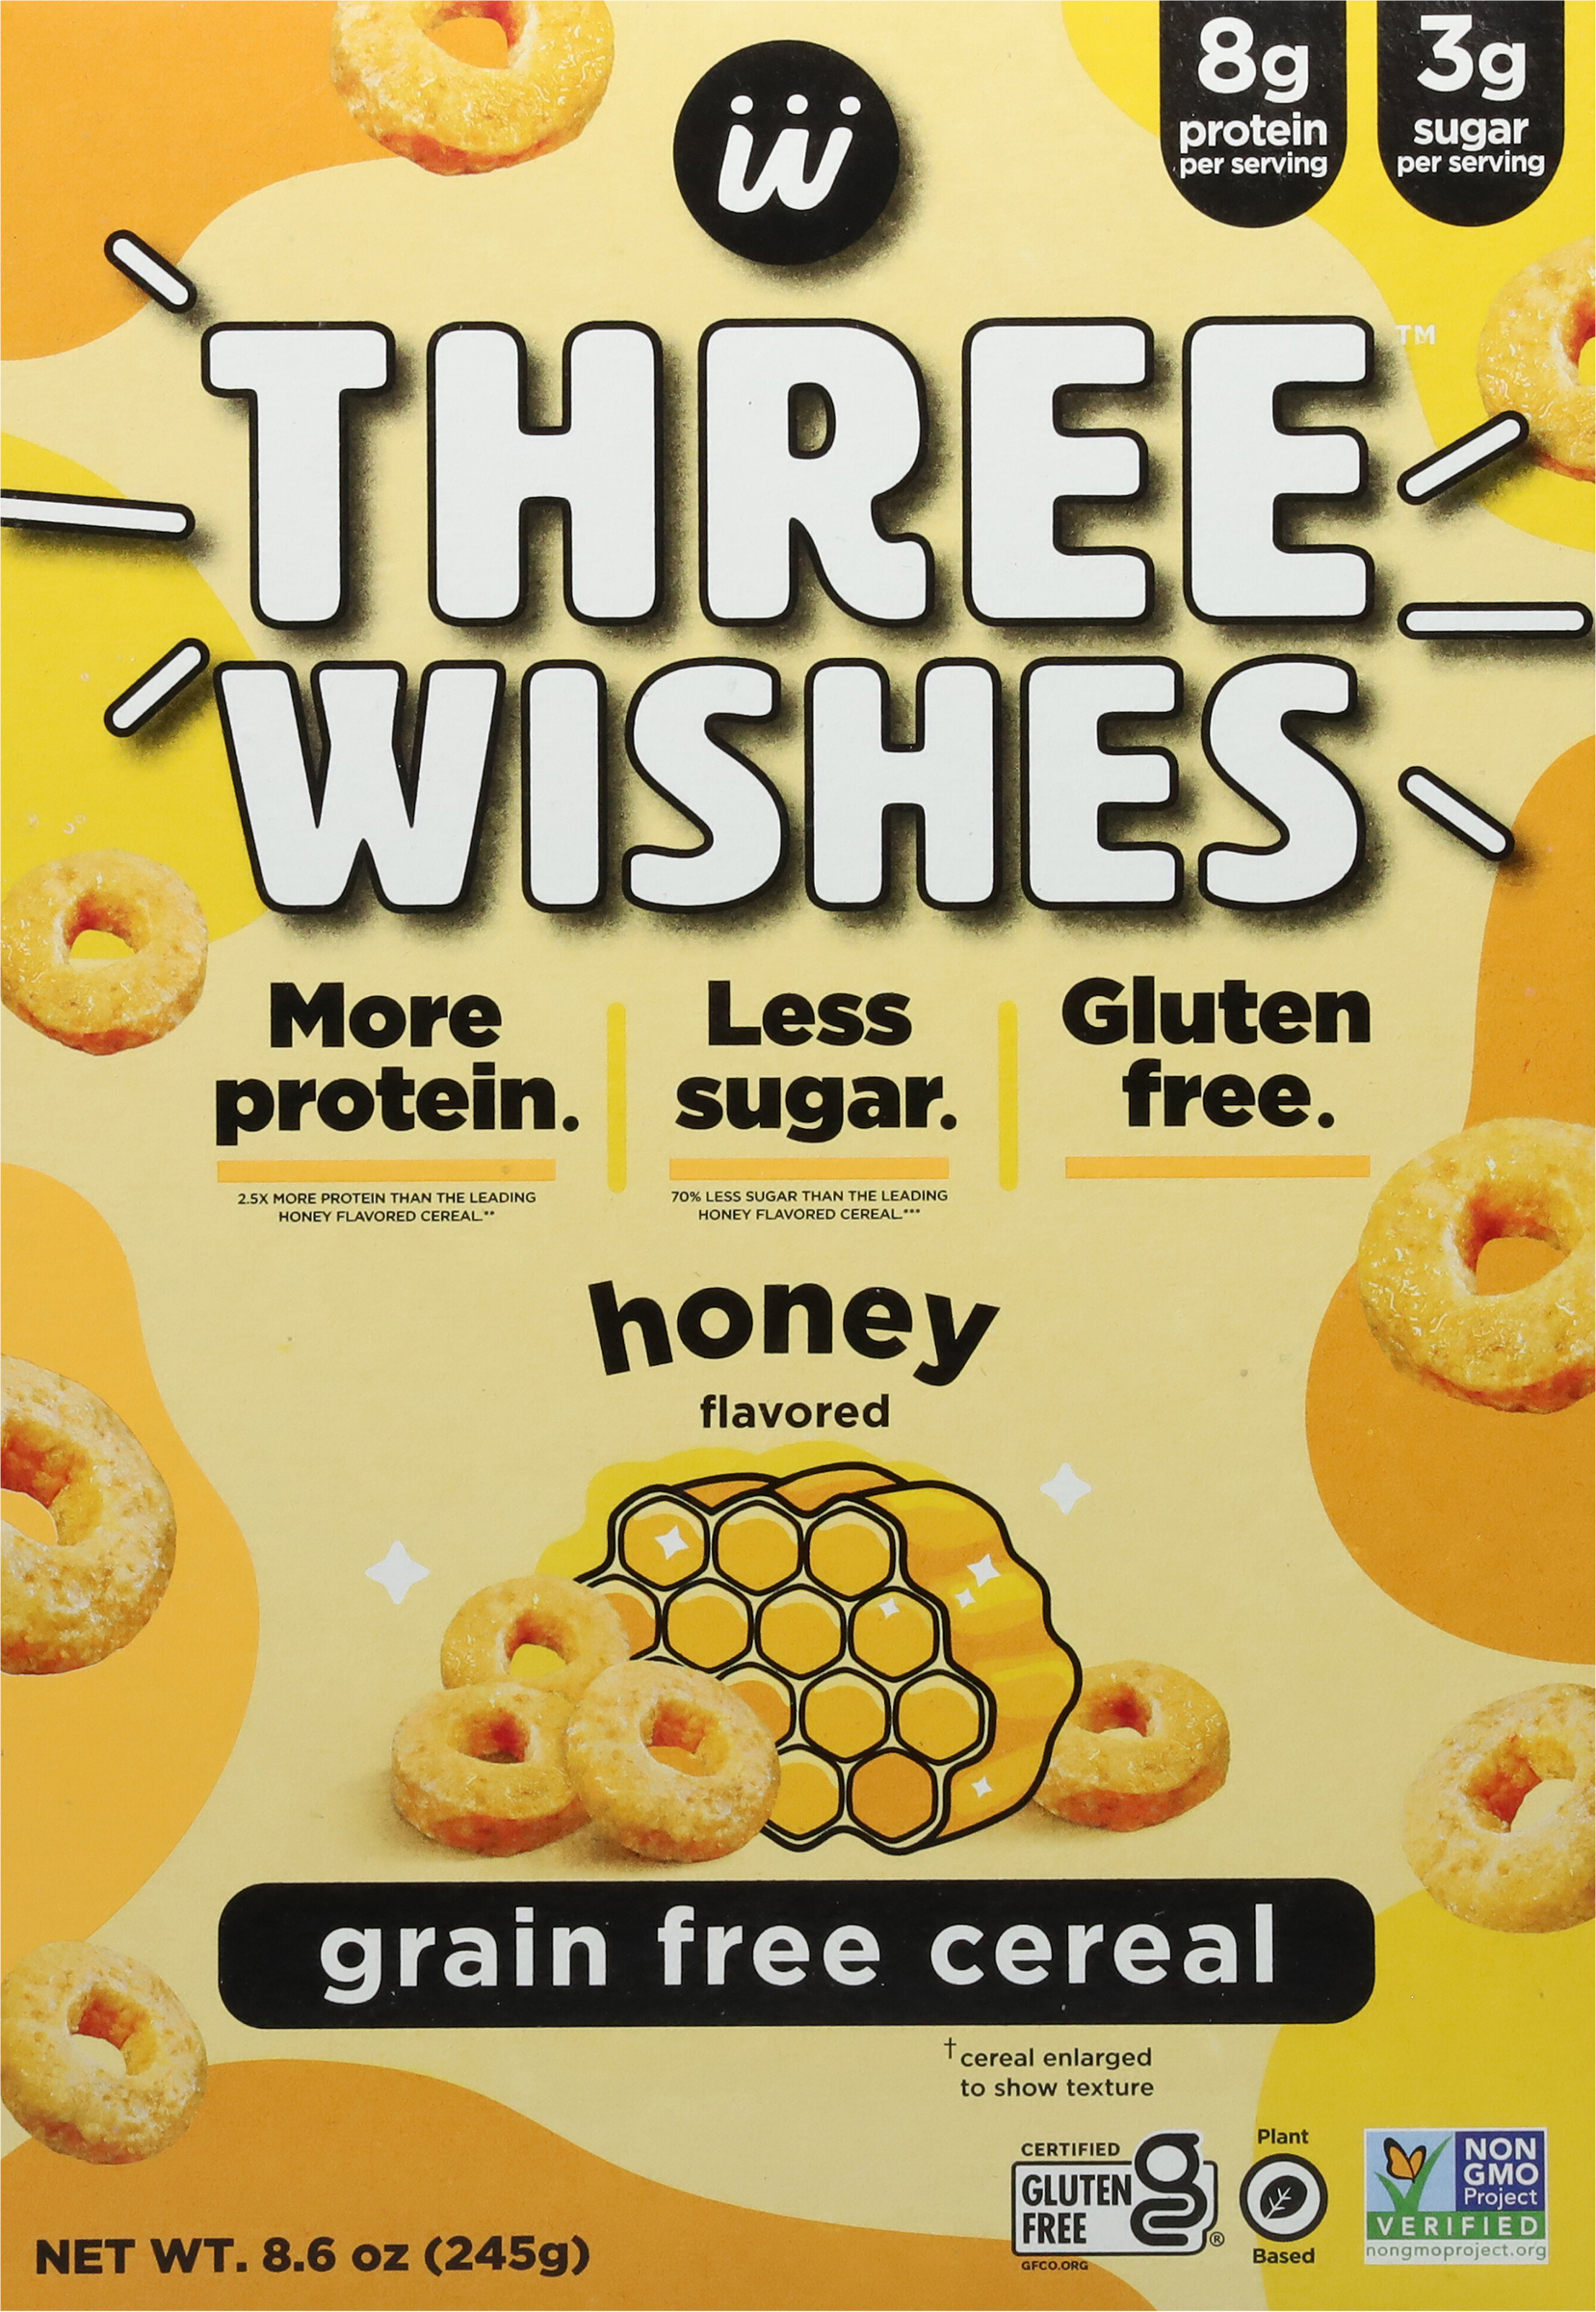 Three Wishes Cereal (@threewishes) • Instagram photos and videos